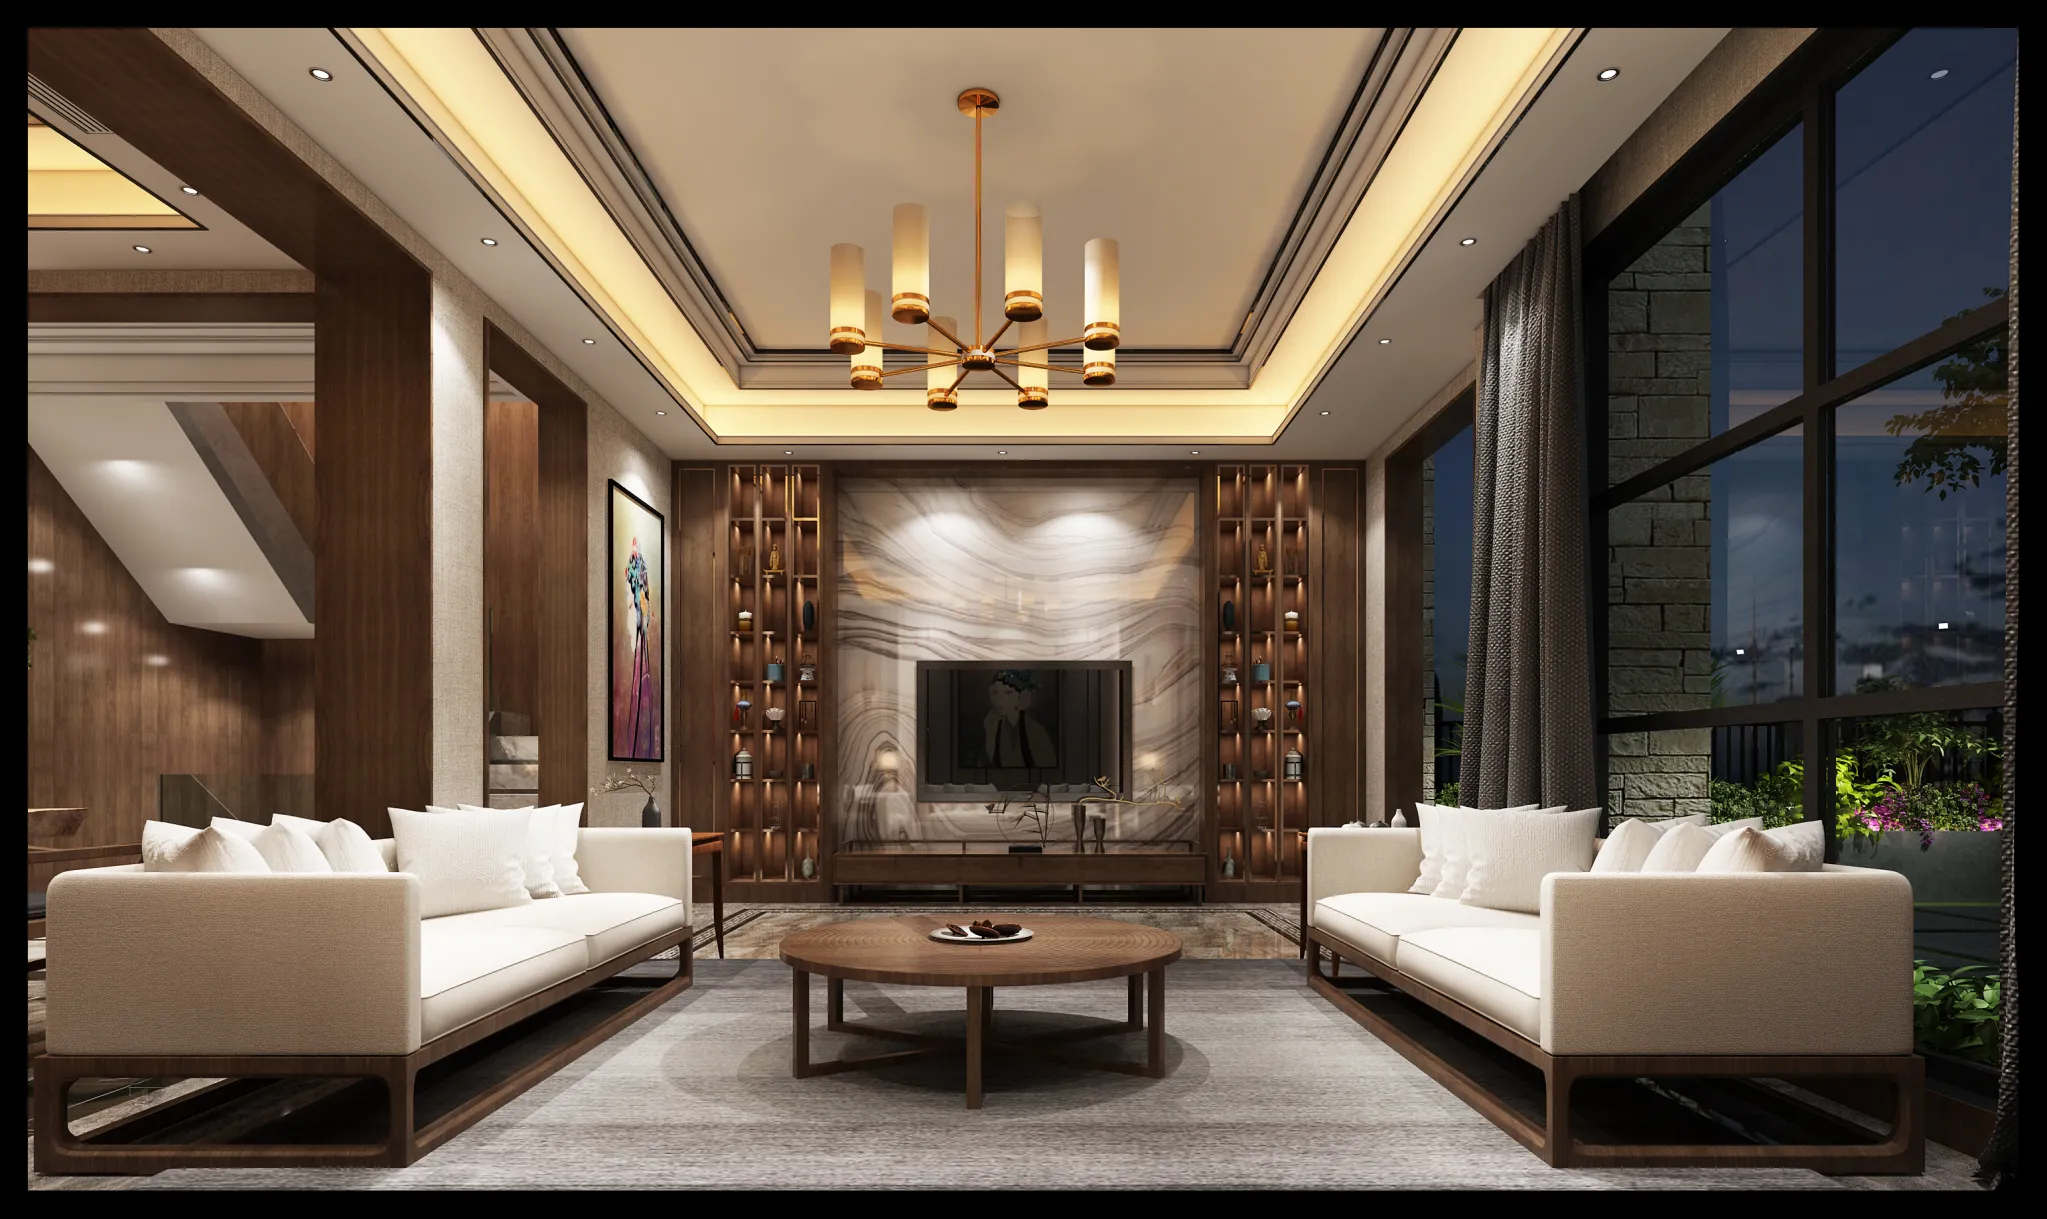 DESMOD INTERIOR 2021 (VRAY) – 4. LIVING ROOM – CHINESE – 079